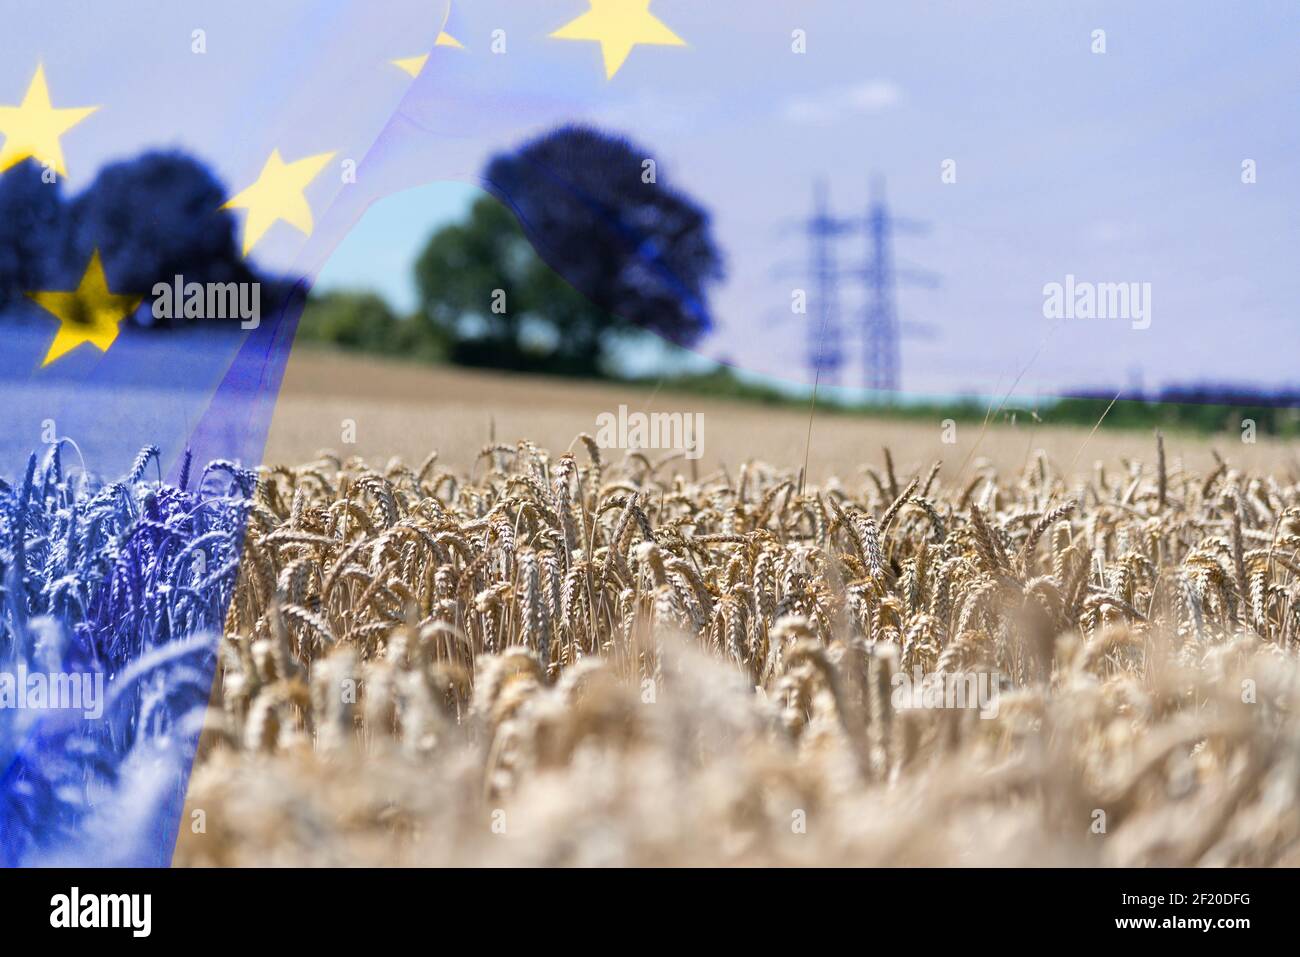 European Union flag EU and agriculture in Europe Stock Photo